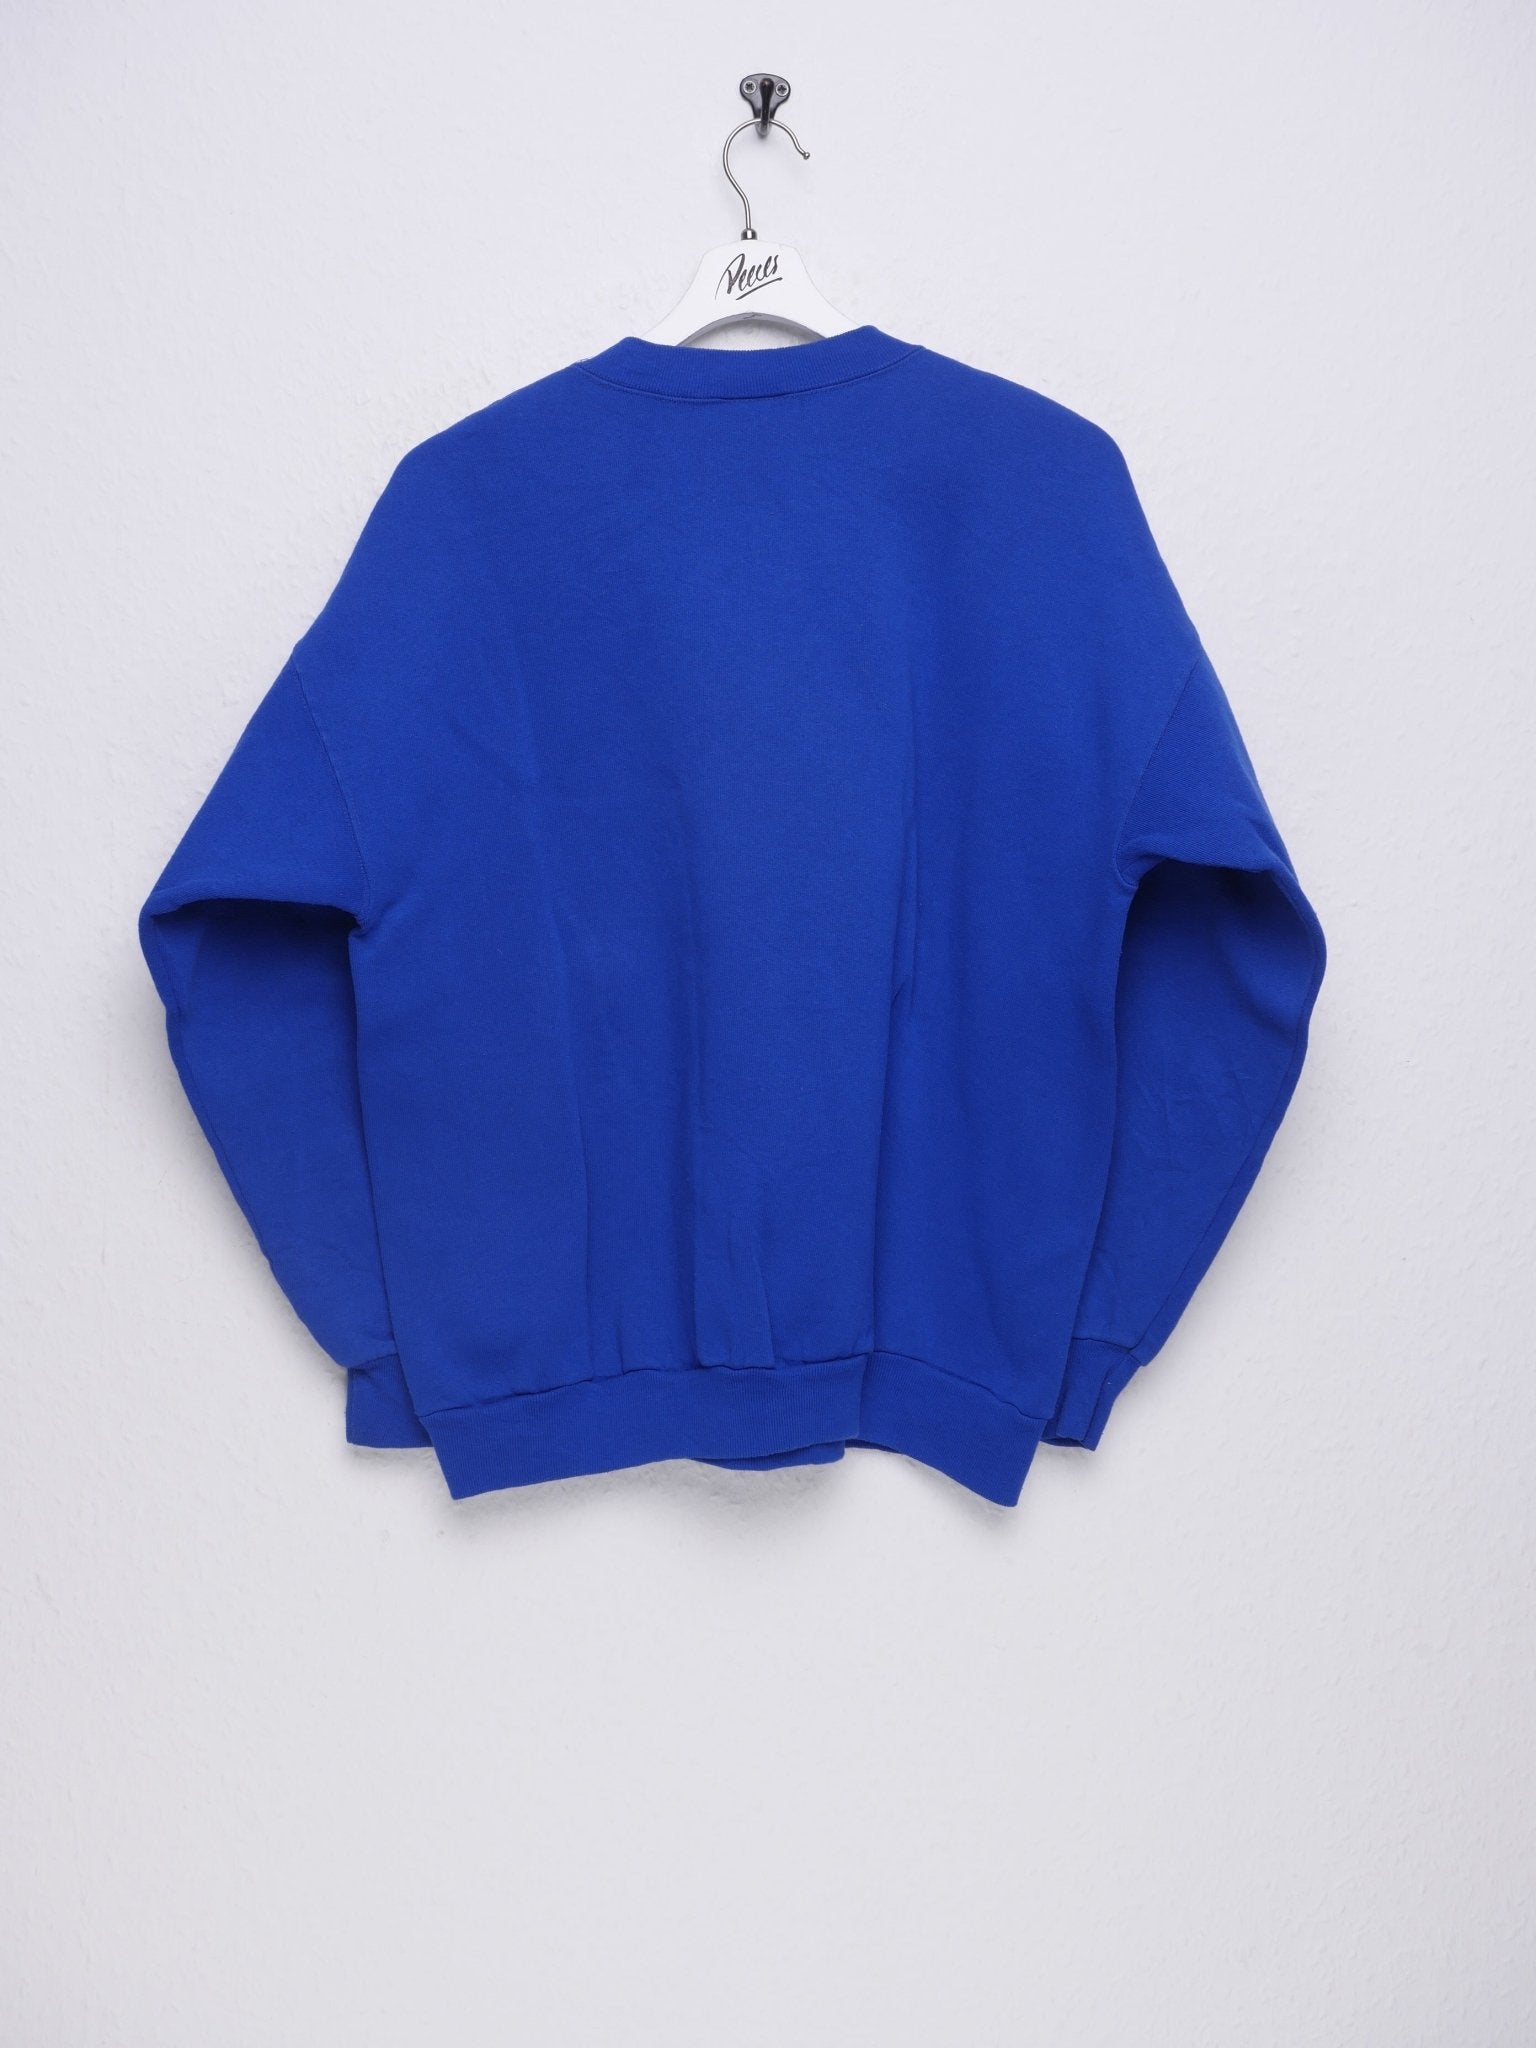 Aged to Perfection printed Spellout blue Sweater - Peeces